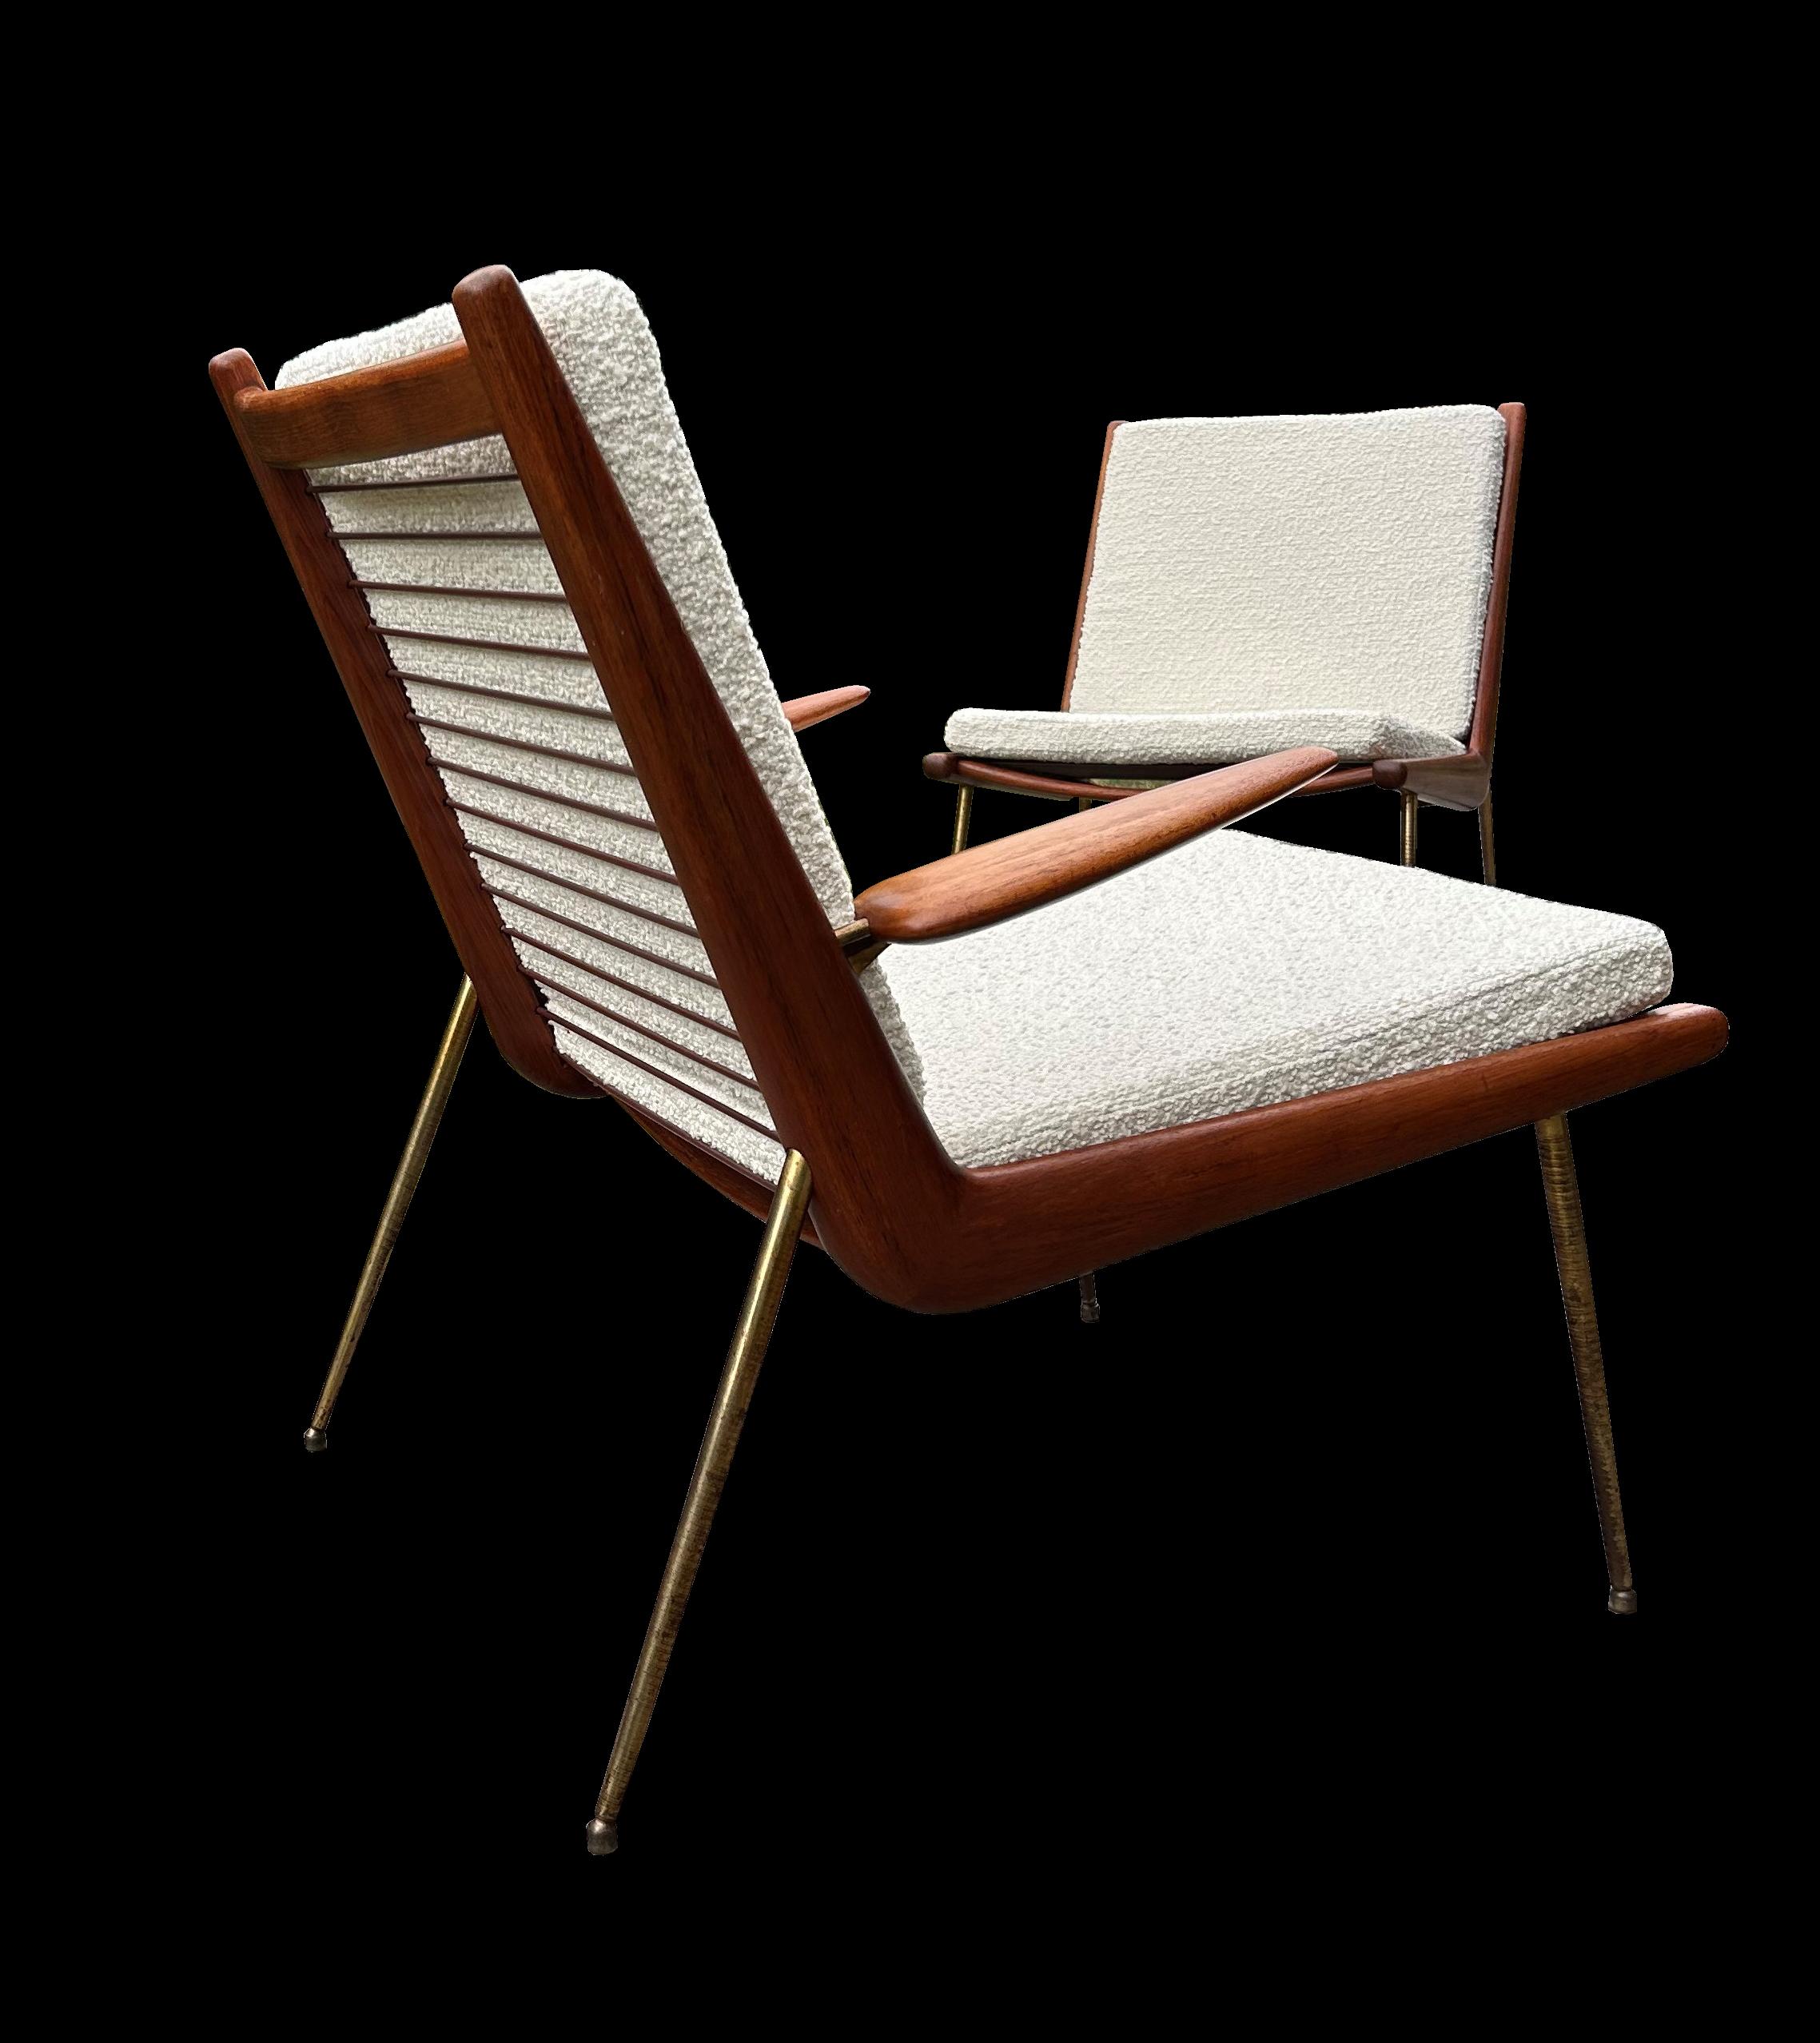 20th Century Boomerang Chair with arms by Peter Hvidt and Orla Molgaard Nielsen For Sale